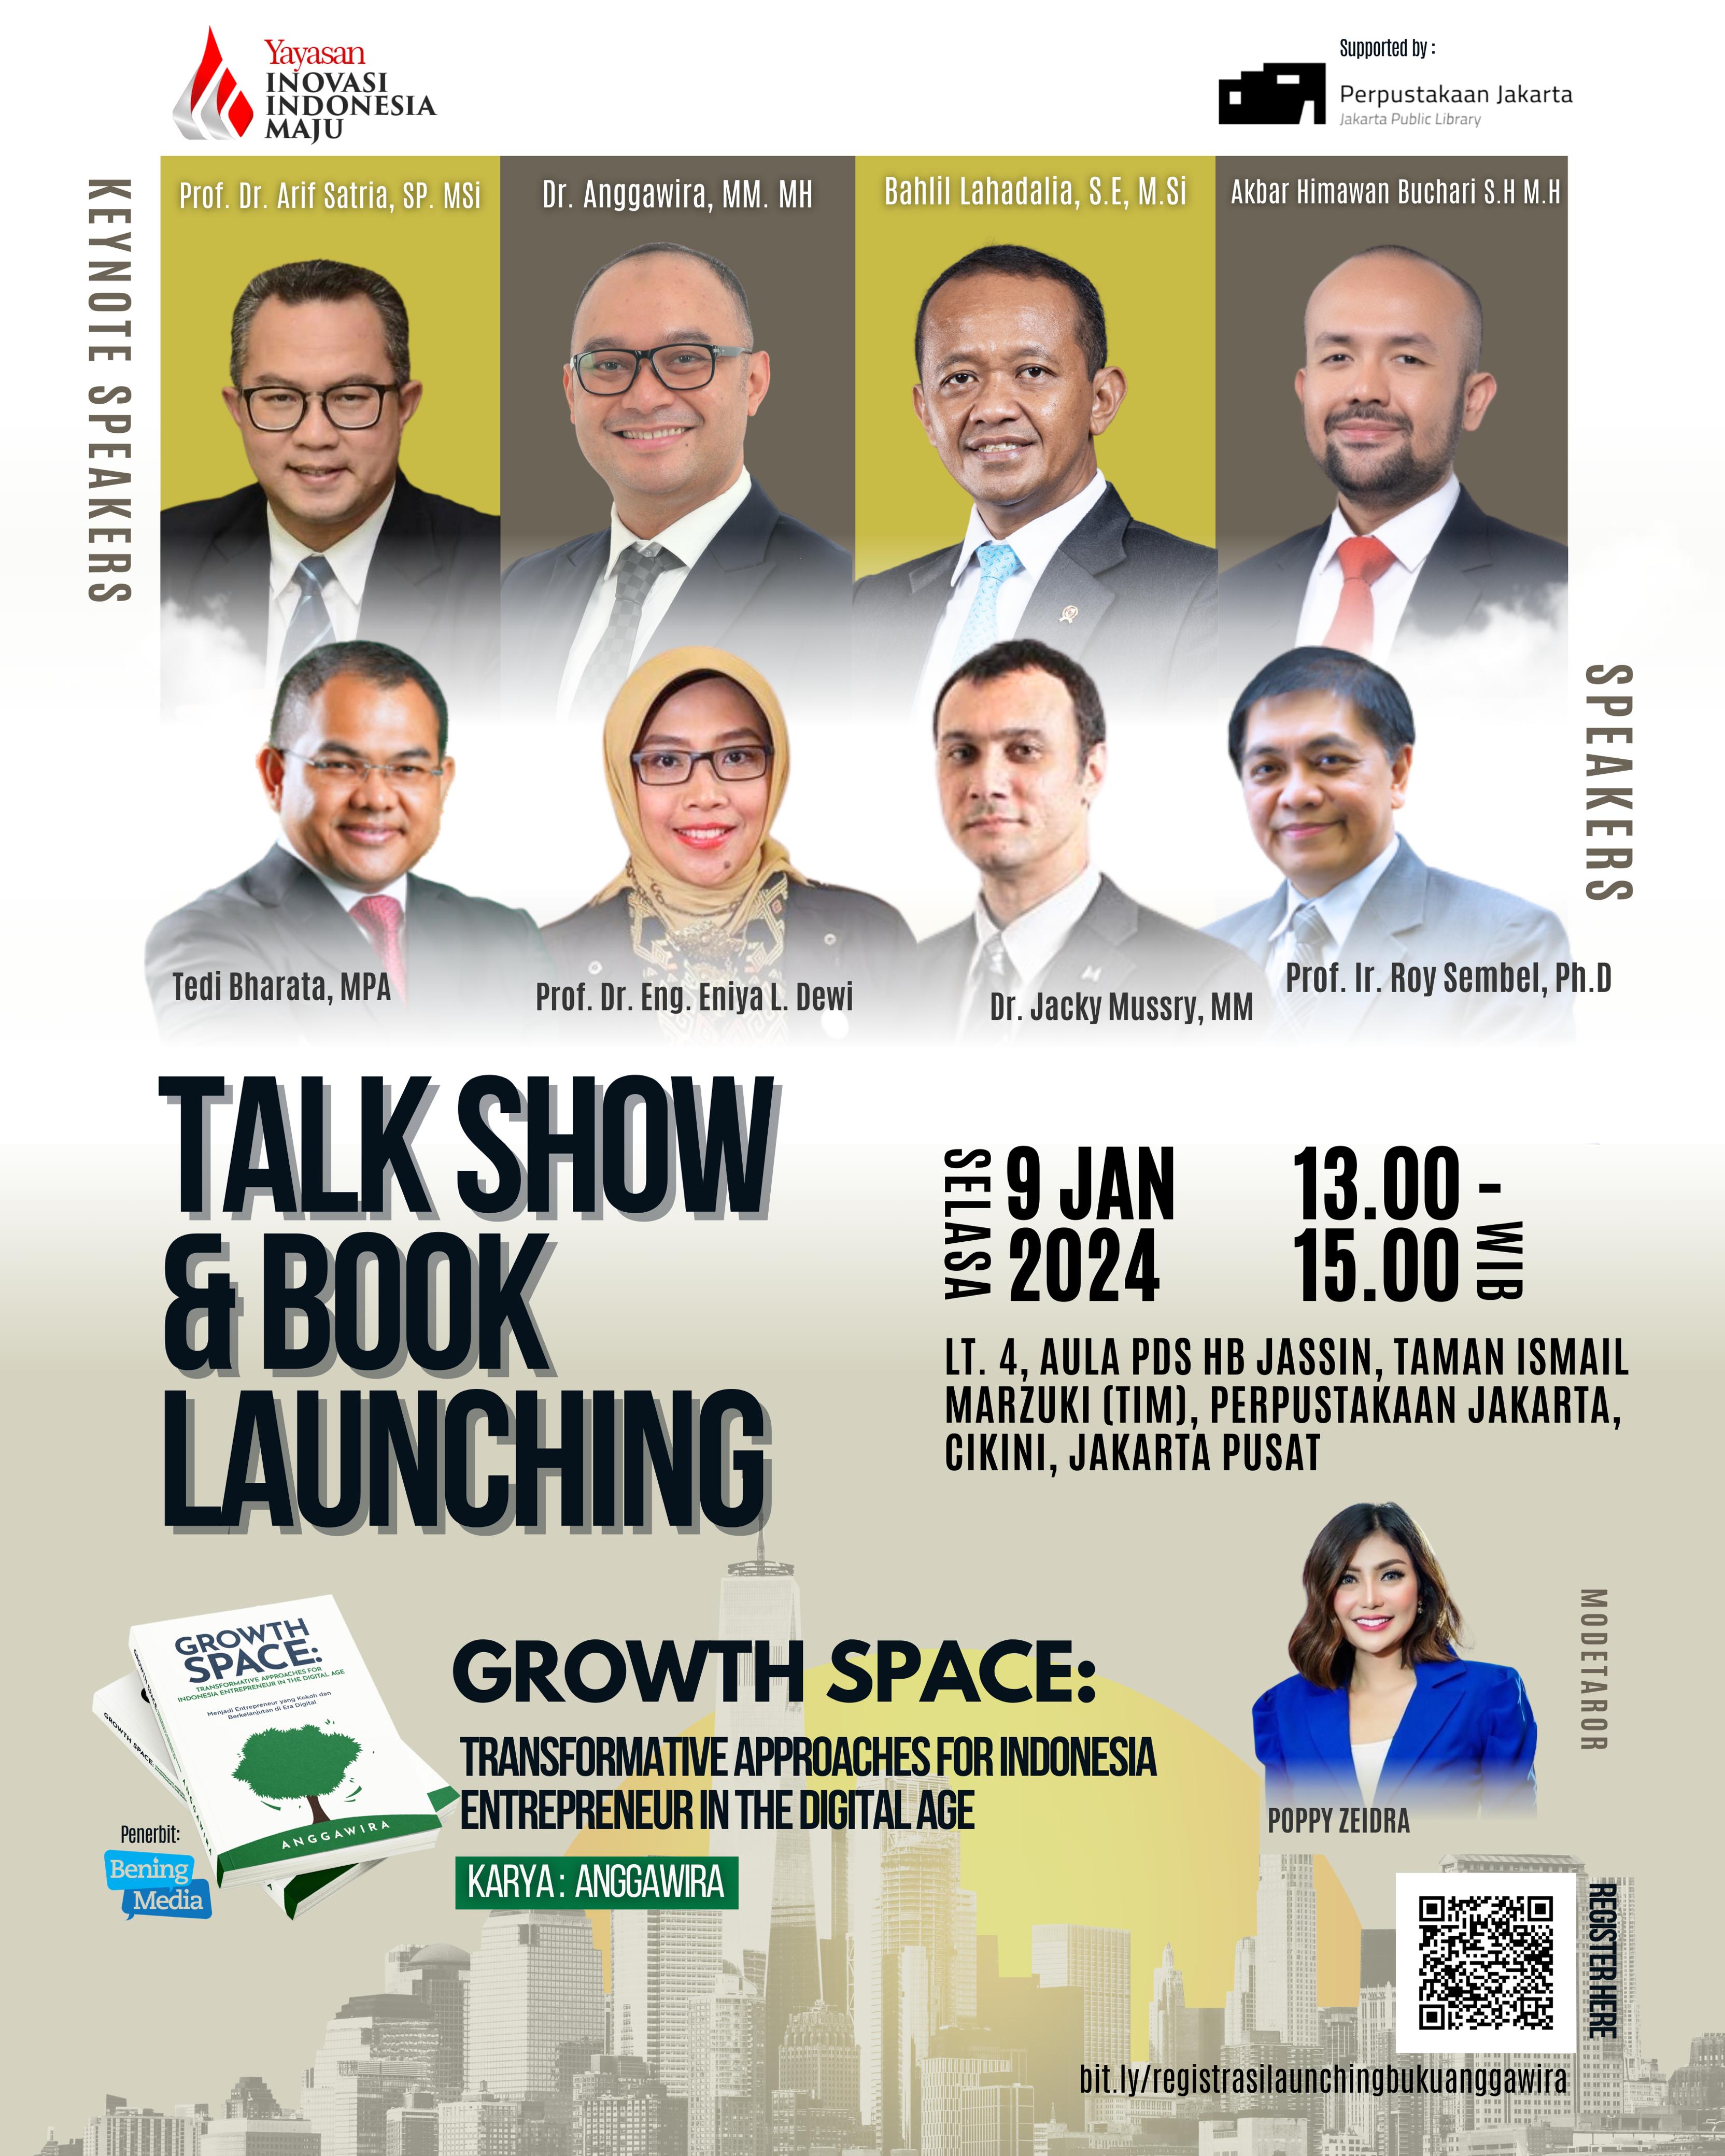 Growth Space: Transformative Approaches For Indonesia Entrepreneur In The Digital Age